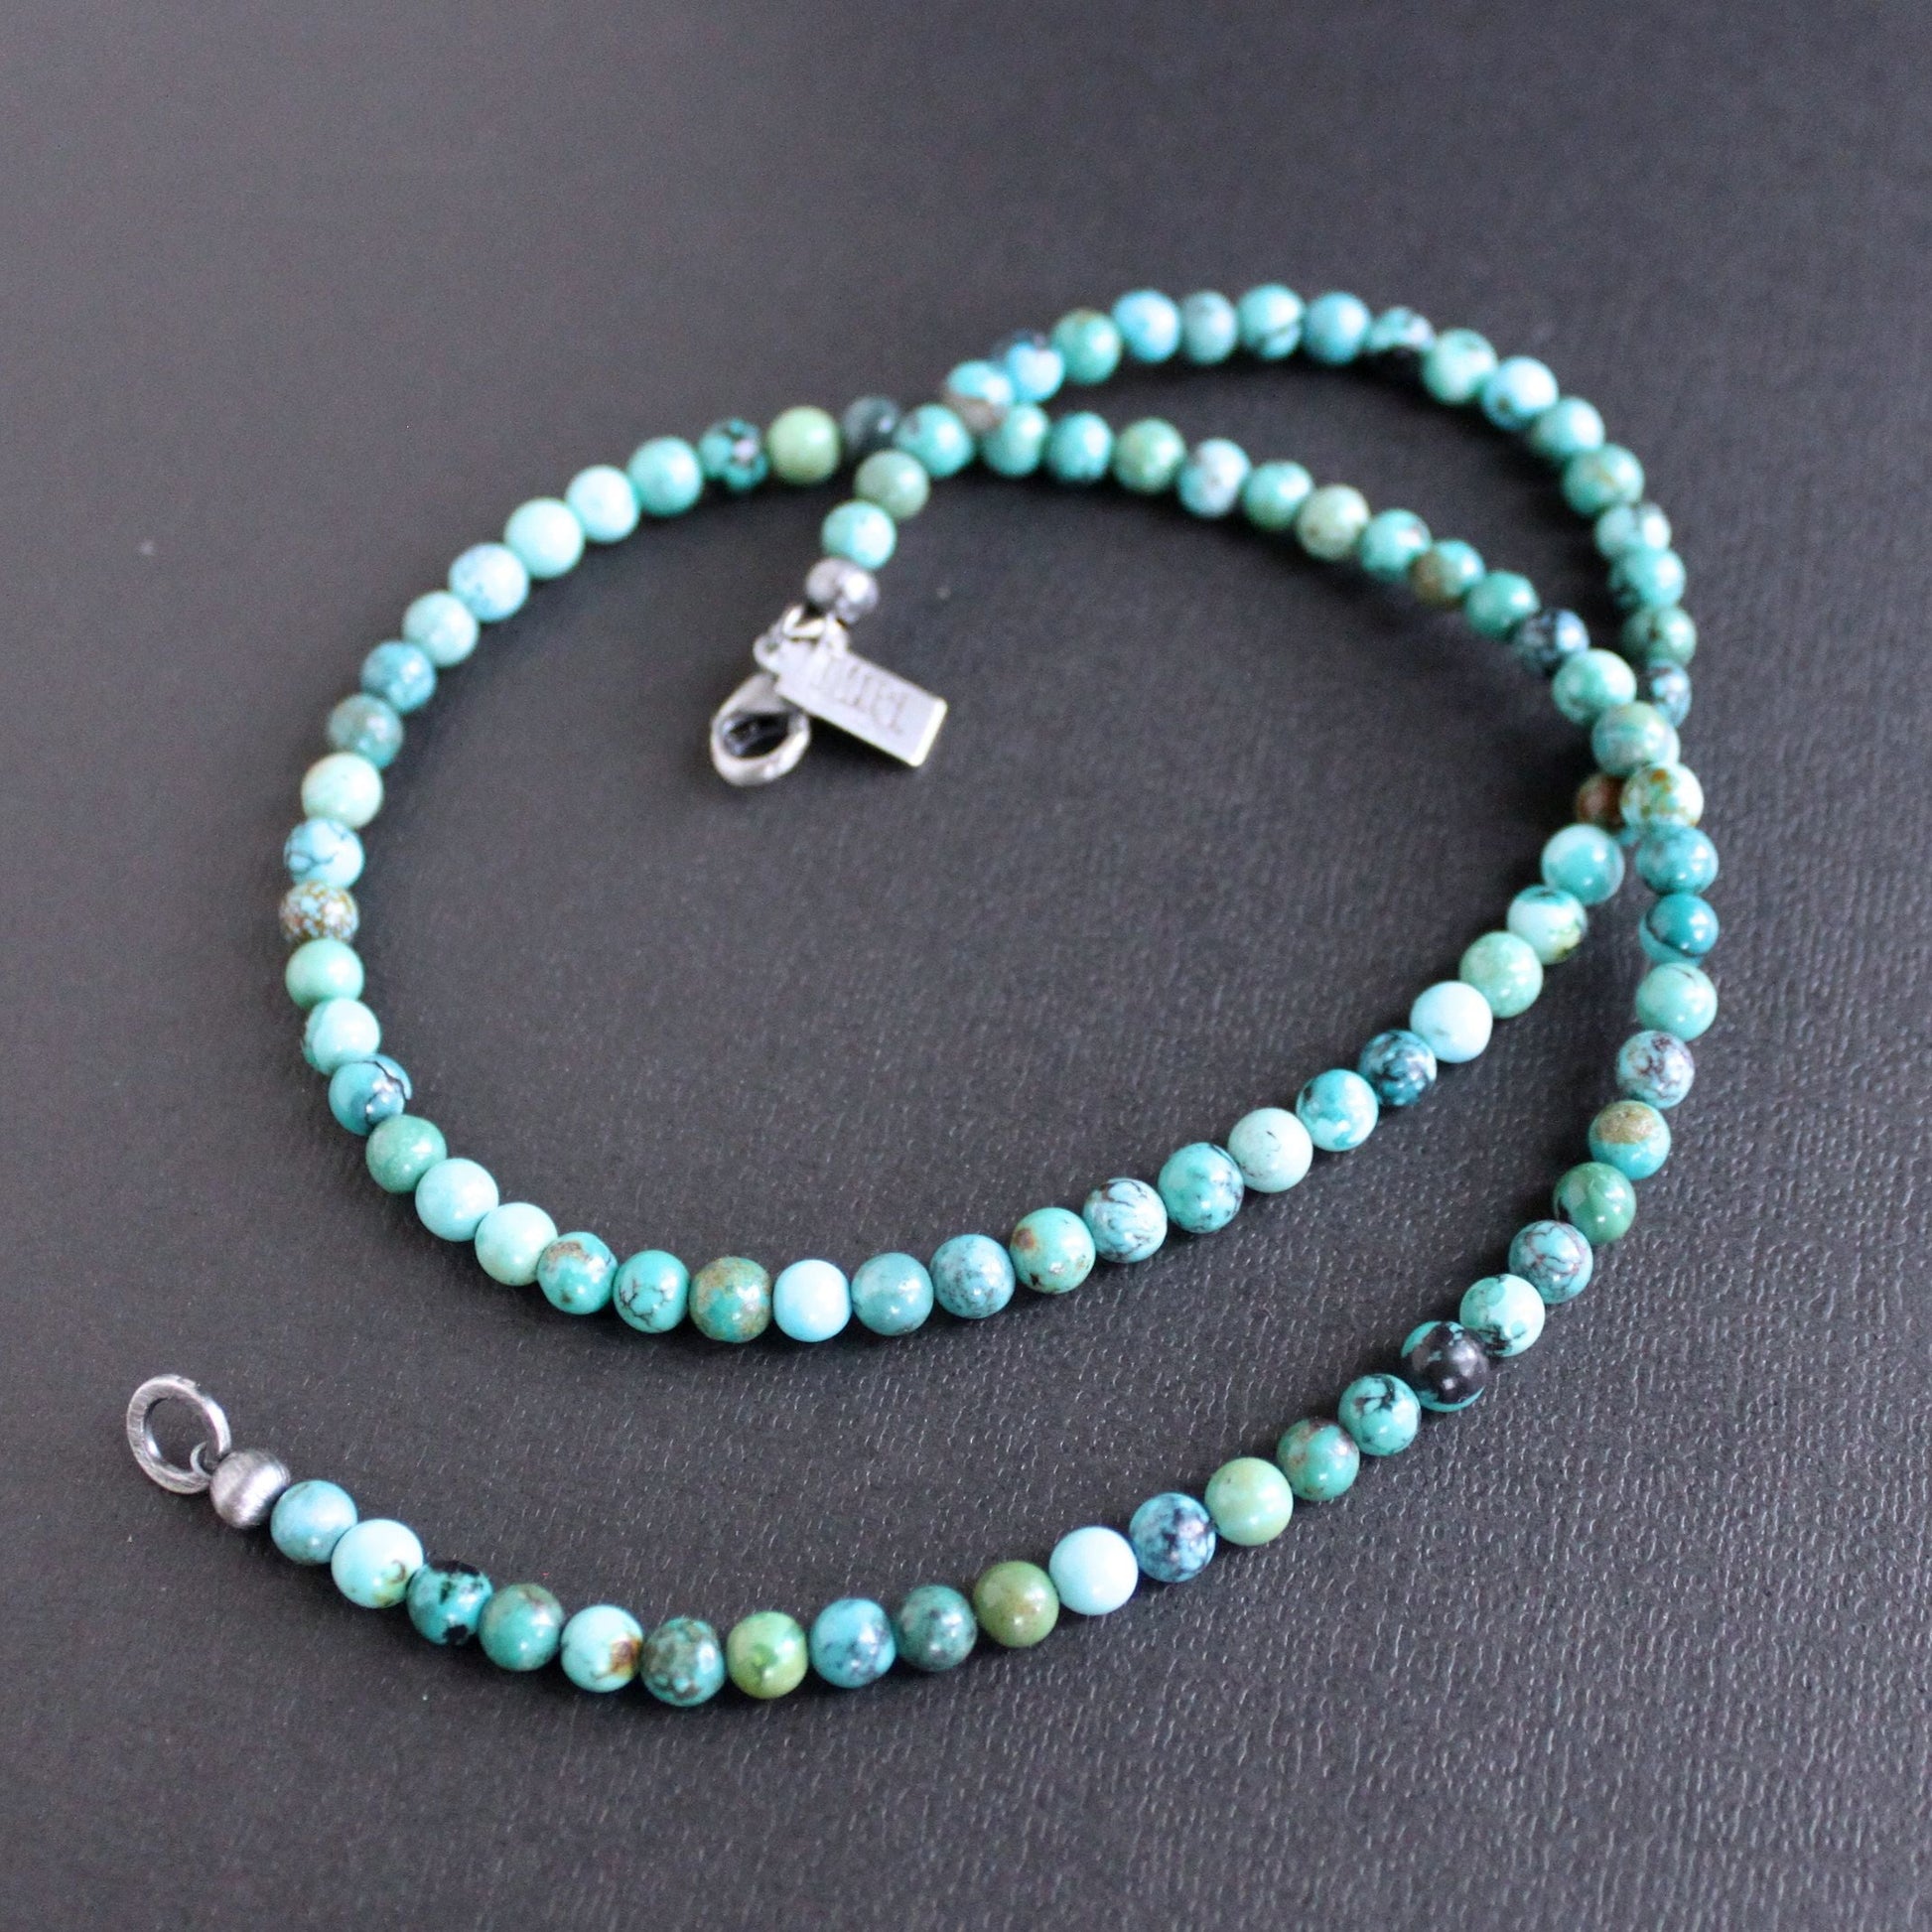 Men's 5mm Turquoise bead necklace